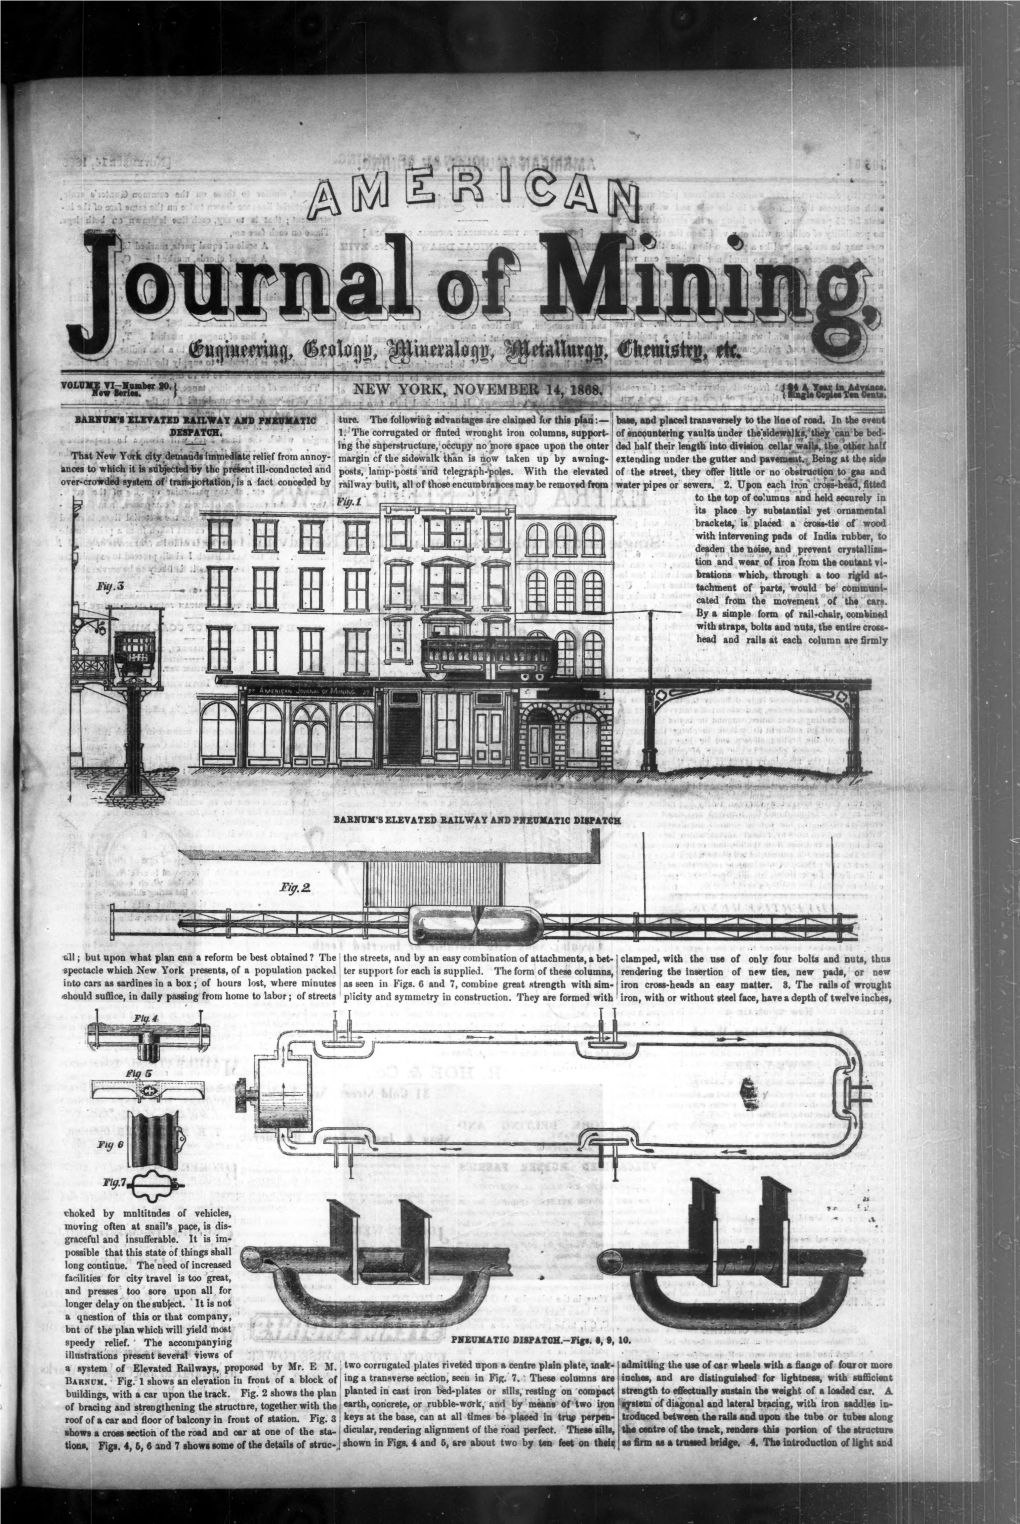 American Journal of Mining 1868-11-14: Vol 6 Iss 20